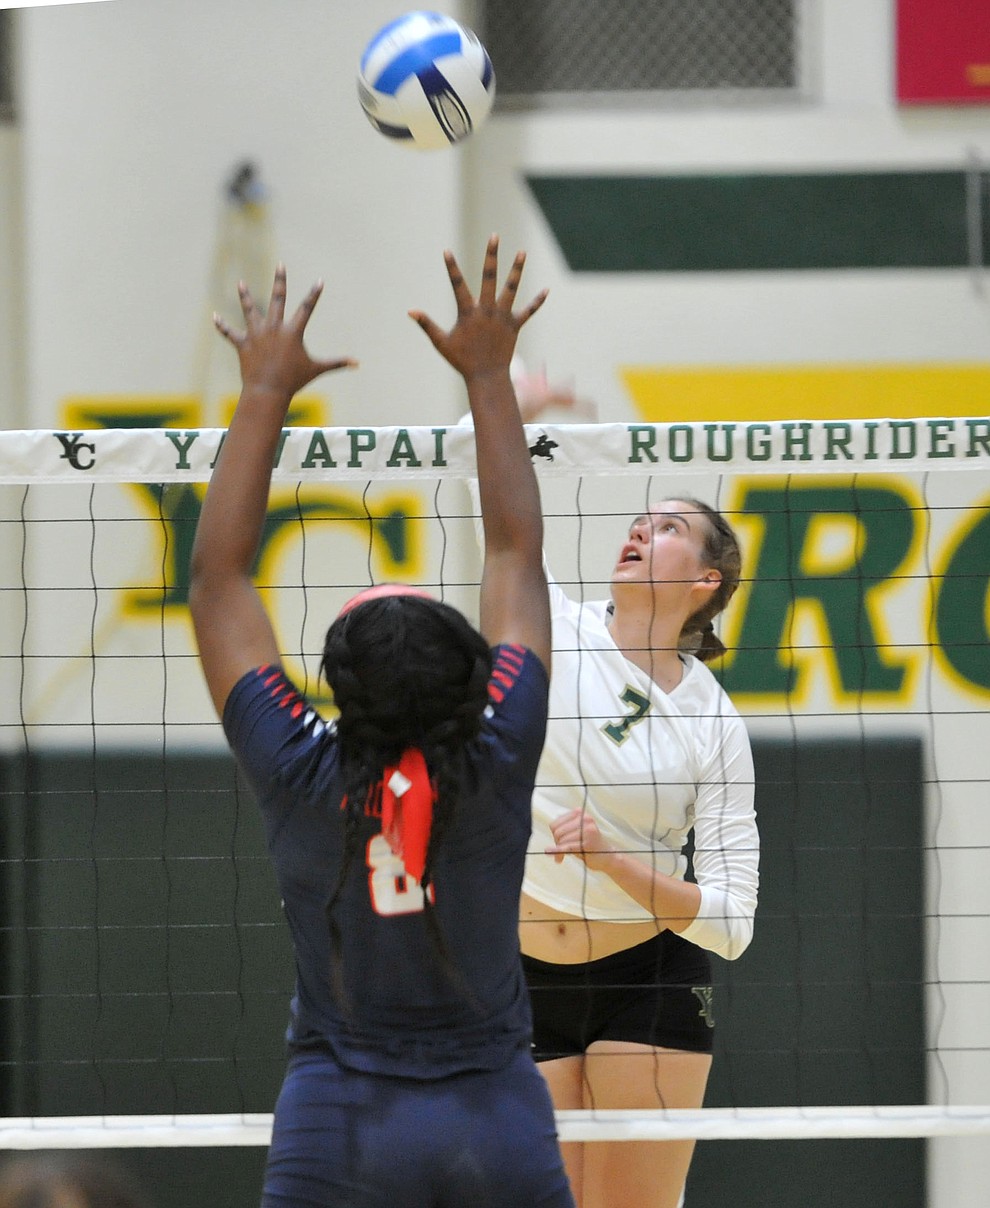 Yavapai's Nynke deVries gets a kill as the Roughriders take on Seminole State in the NJCAA Region 1/District B semifinal game Wednesday night in Prescott. (Les Stukenberg/Courier)